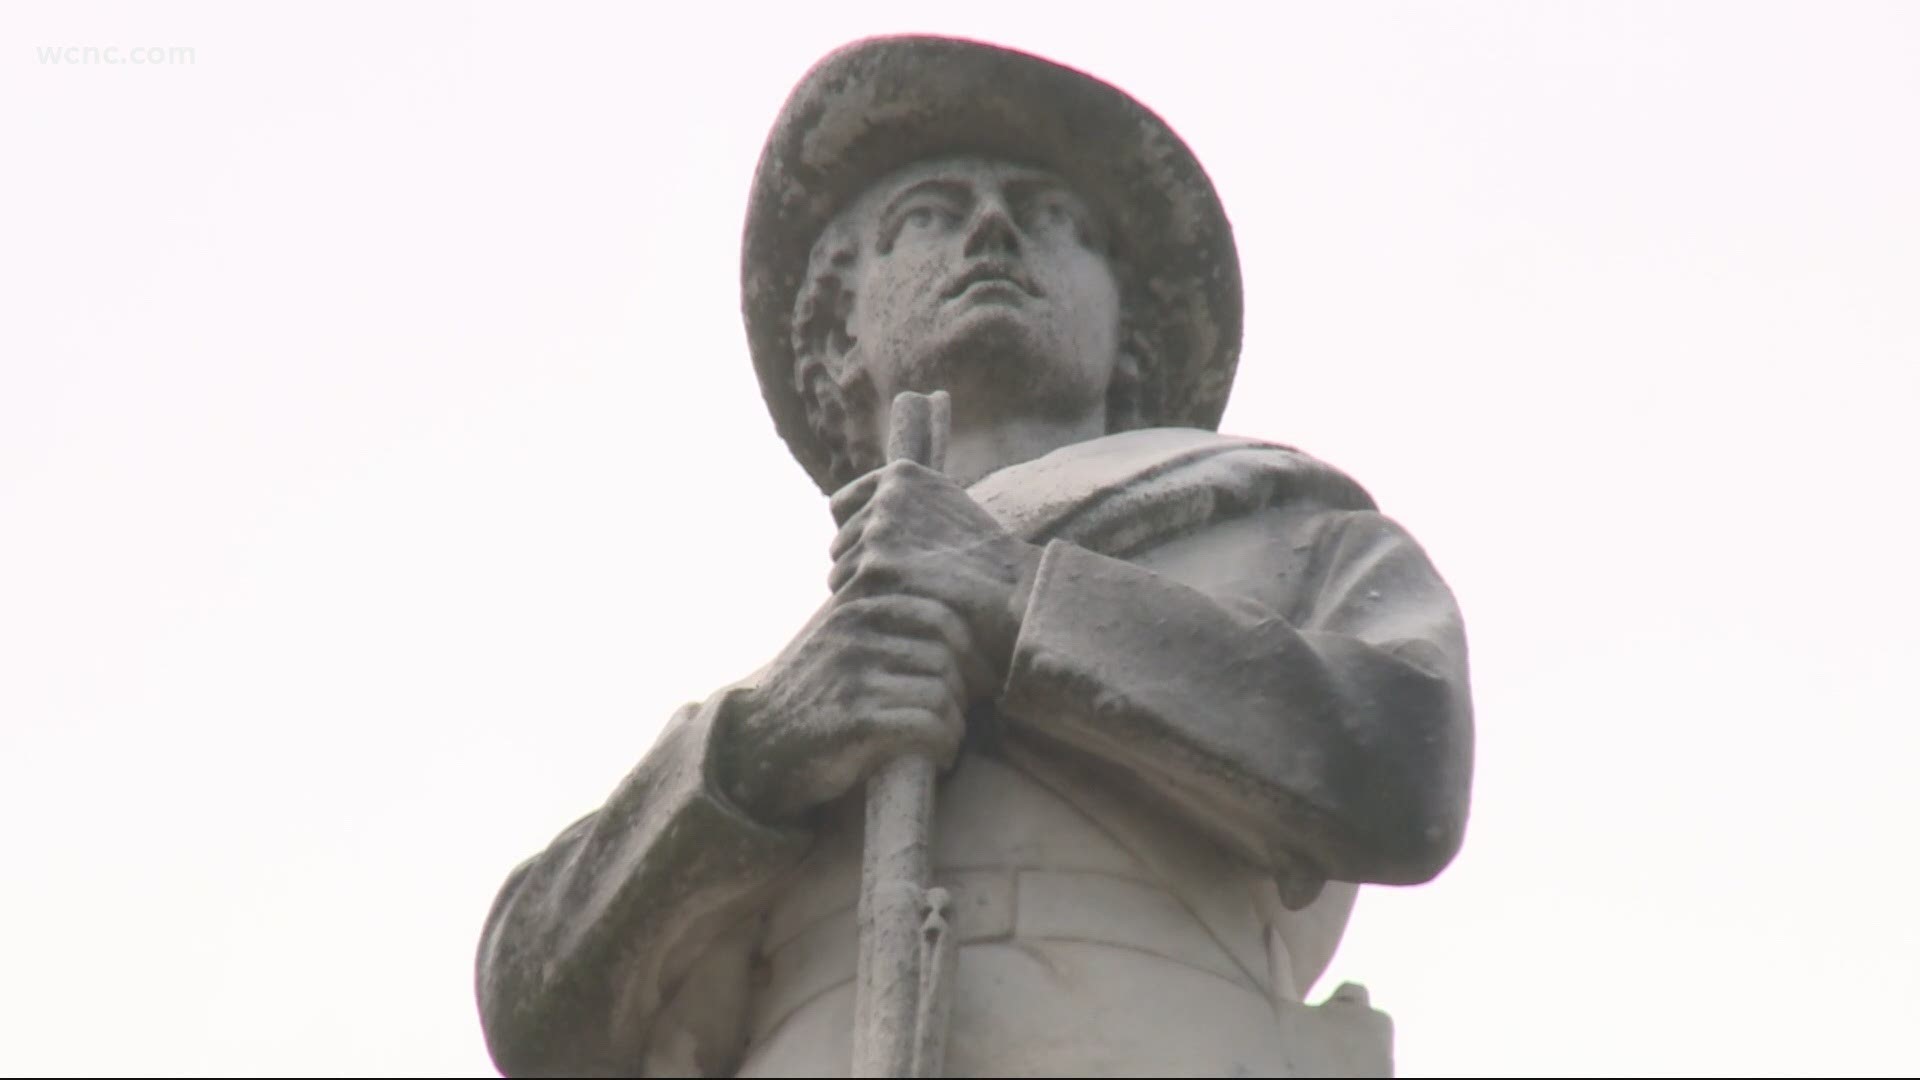 The Gaston County NAACP and other organizations are suing to remove a Confederate Monument at the entrance to the courthouse.